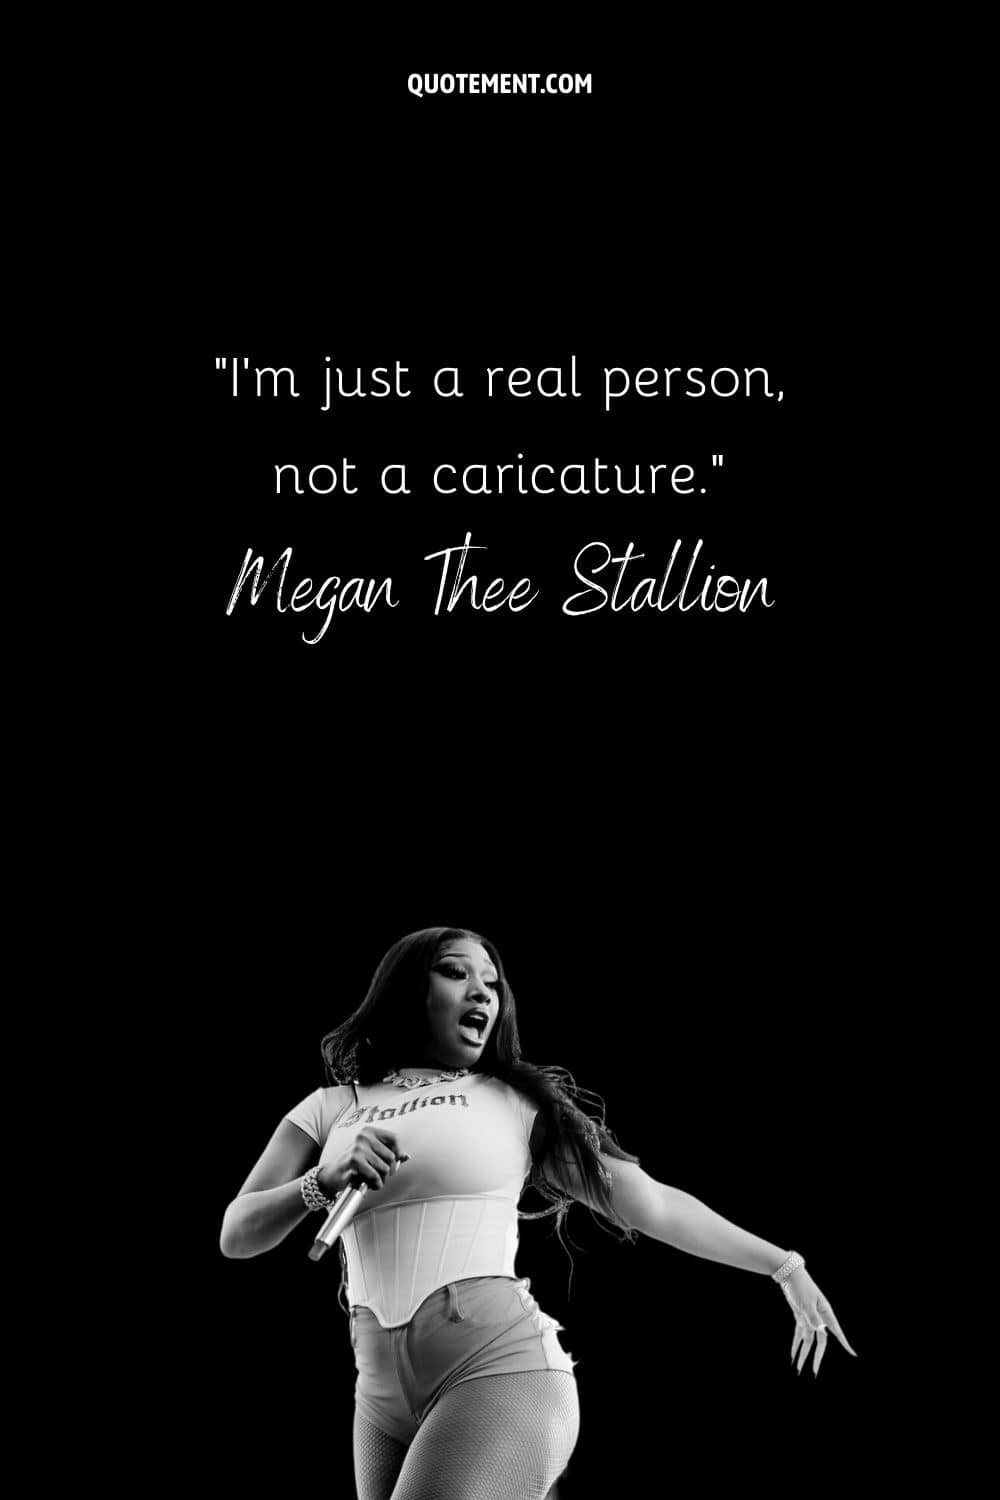 “I'm just a real person, not a caricature.” — Megan Thee Stallion